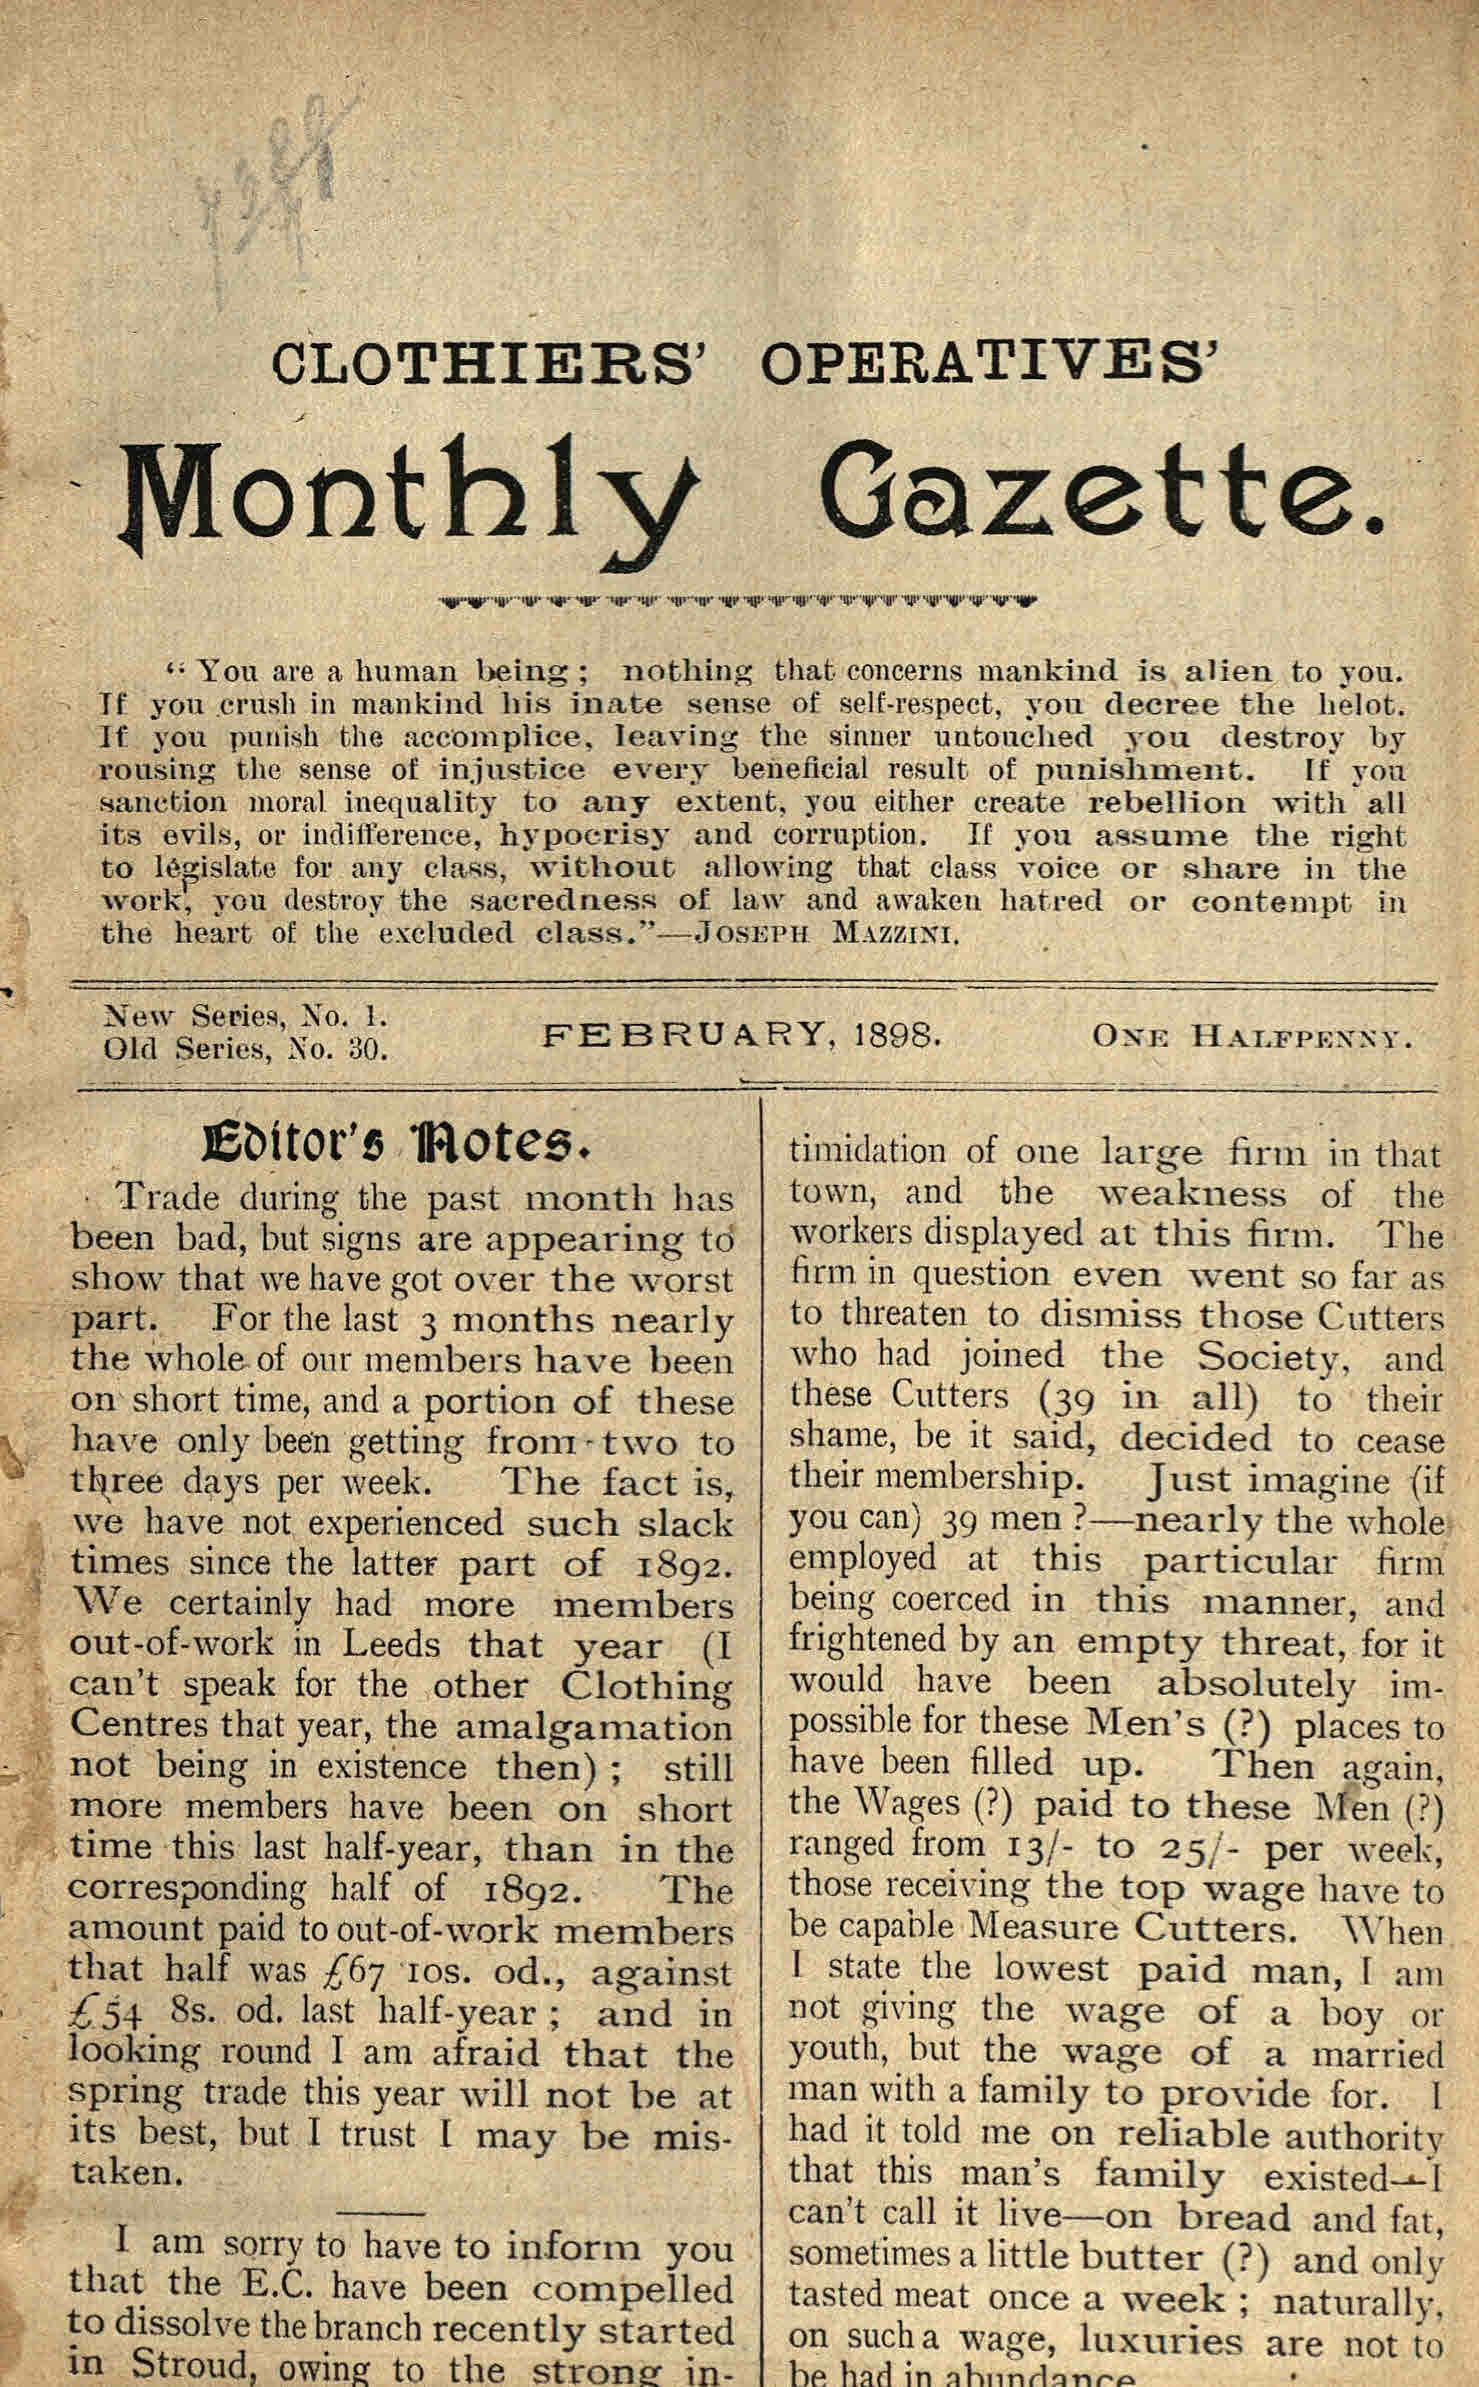 Front page of the Clothiers Operatives Monthly Gazette, February 1898